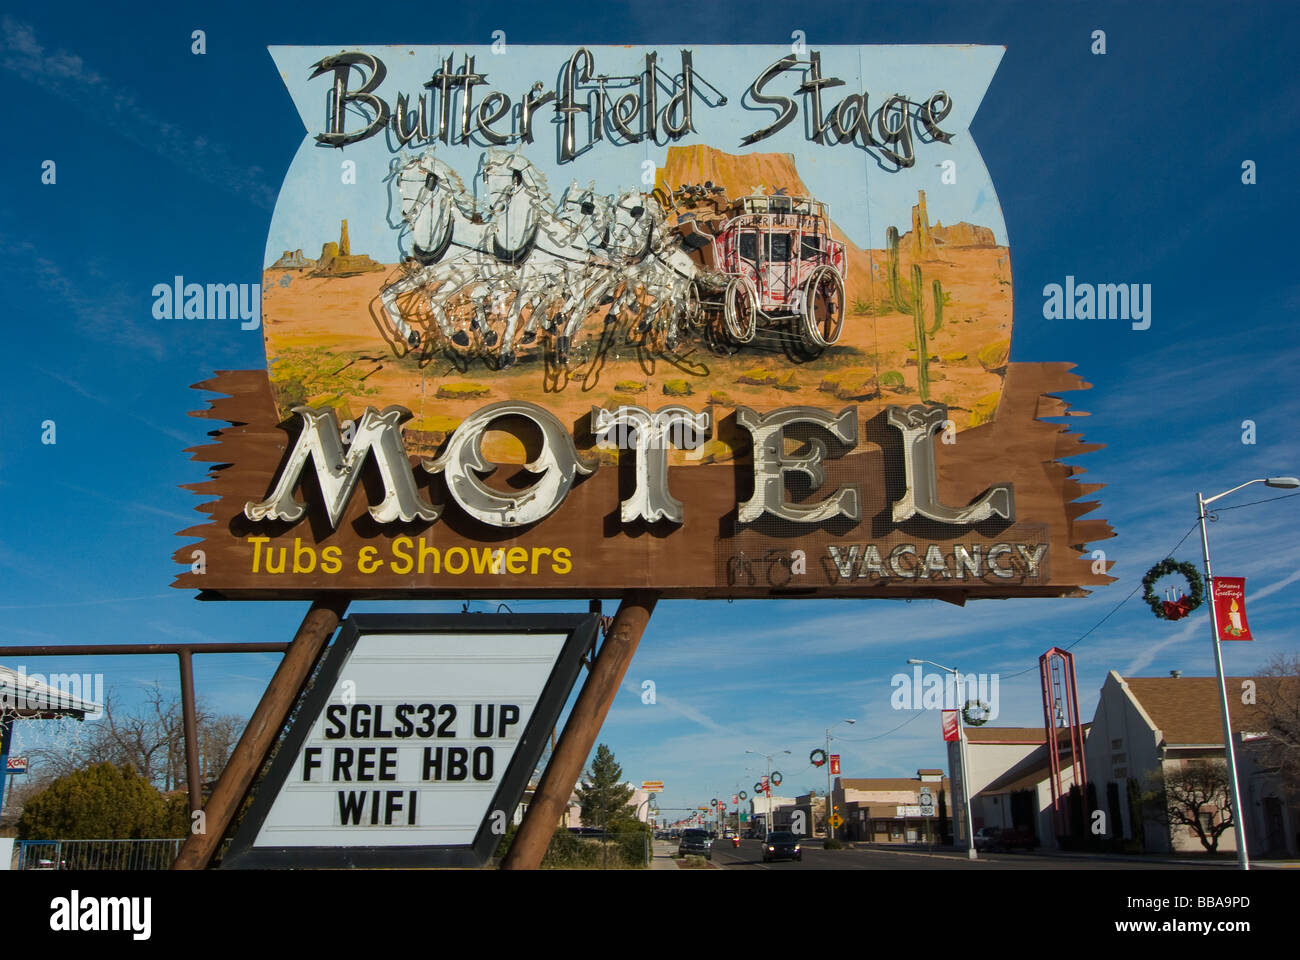 Butterfield Stage Motel sign, Deming, New Mexico, USA. Stock Photo